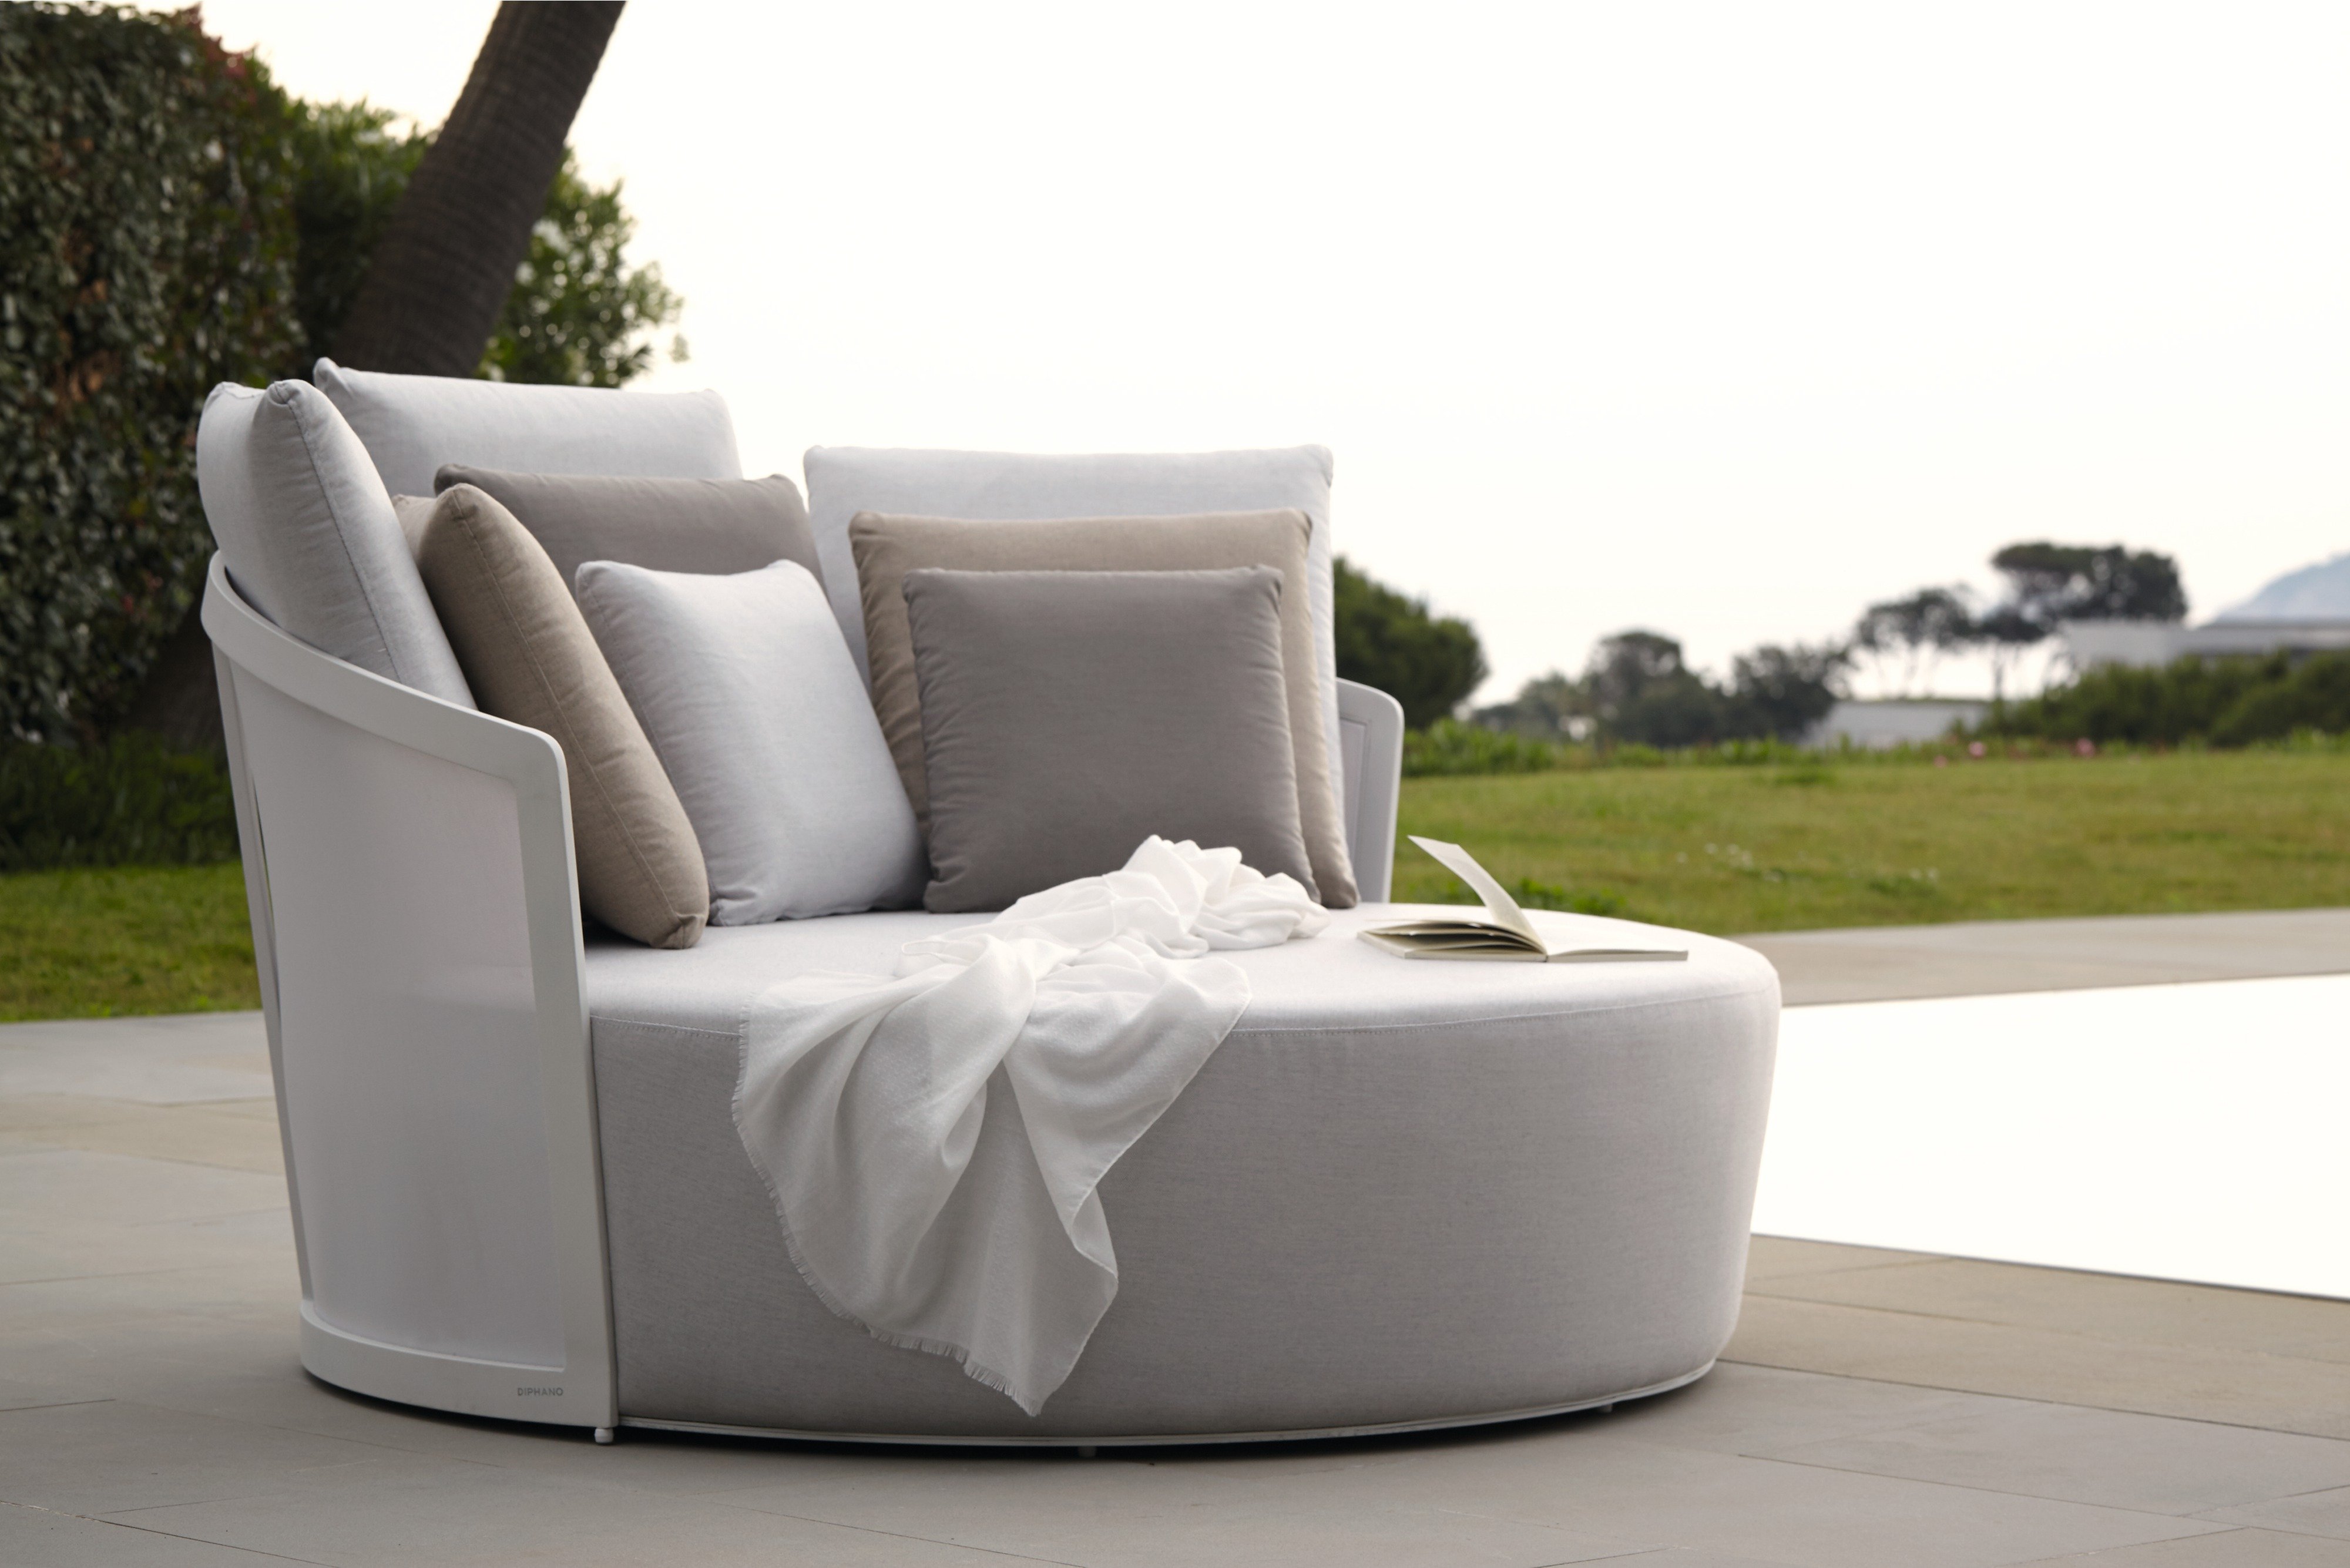 MARBELLA Daybed